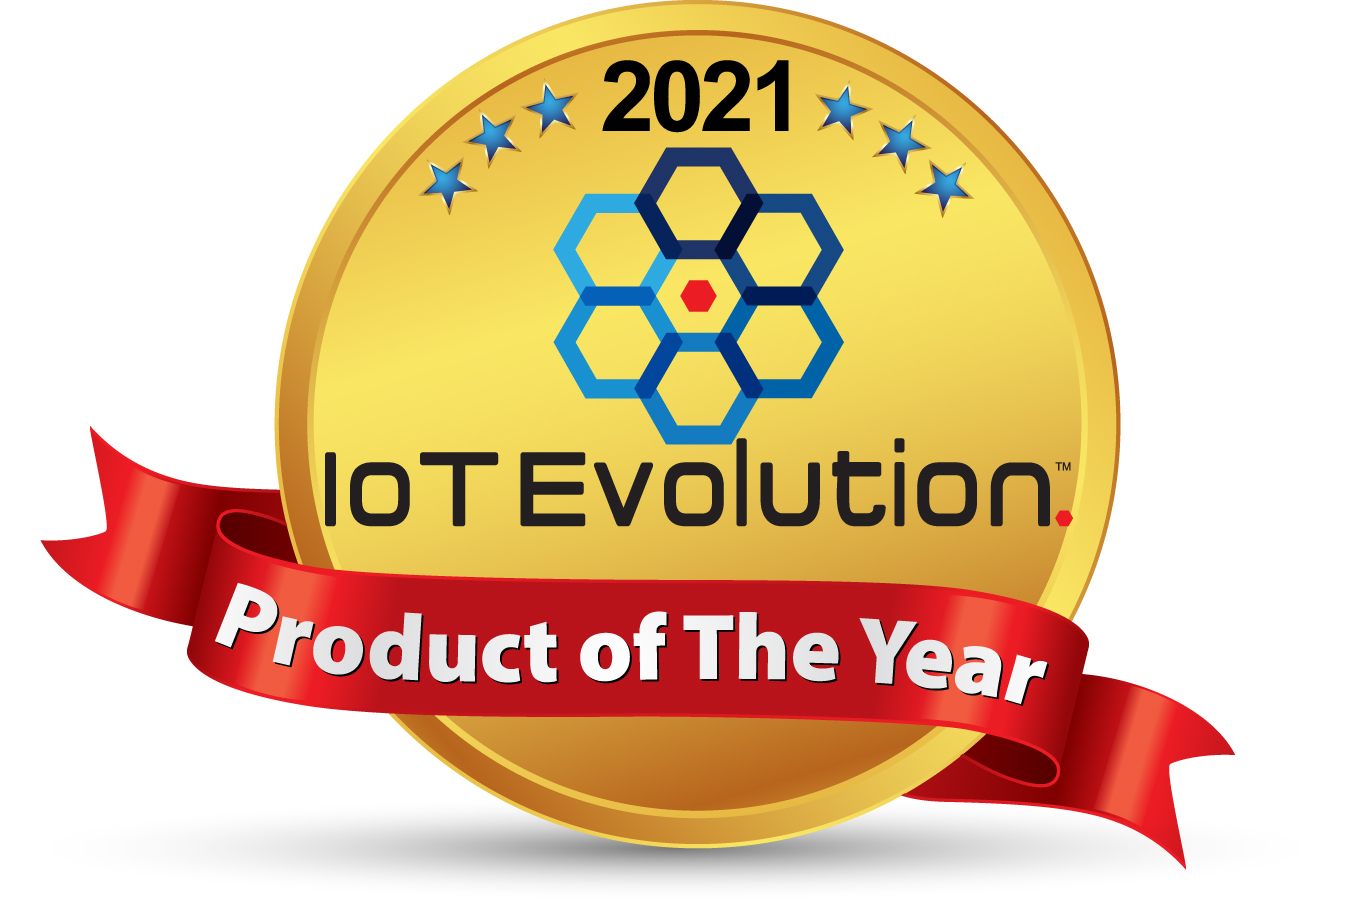 Iot evolution product of the year.